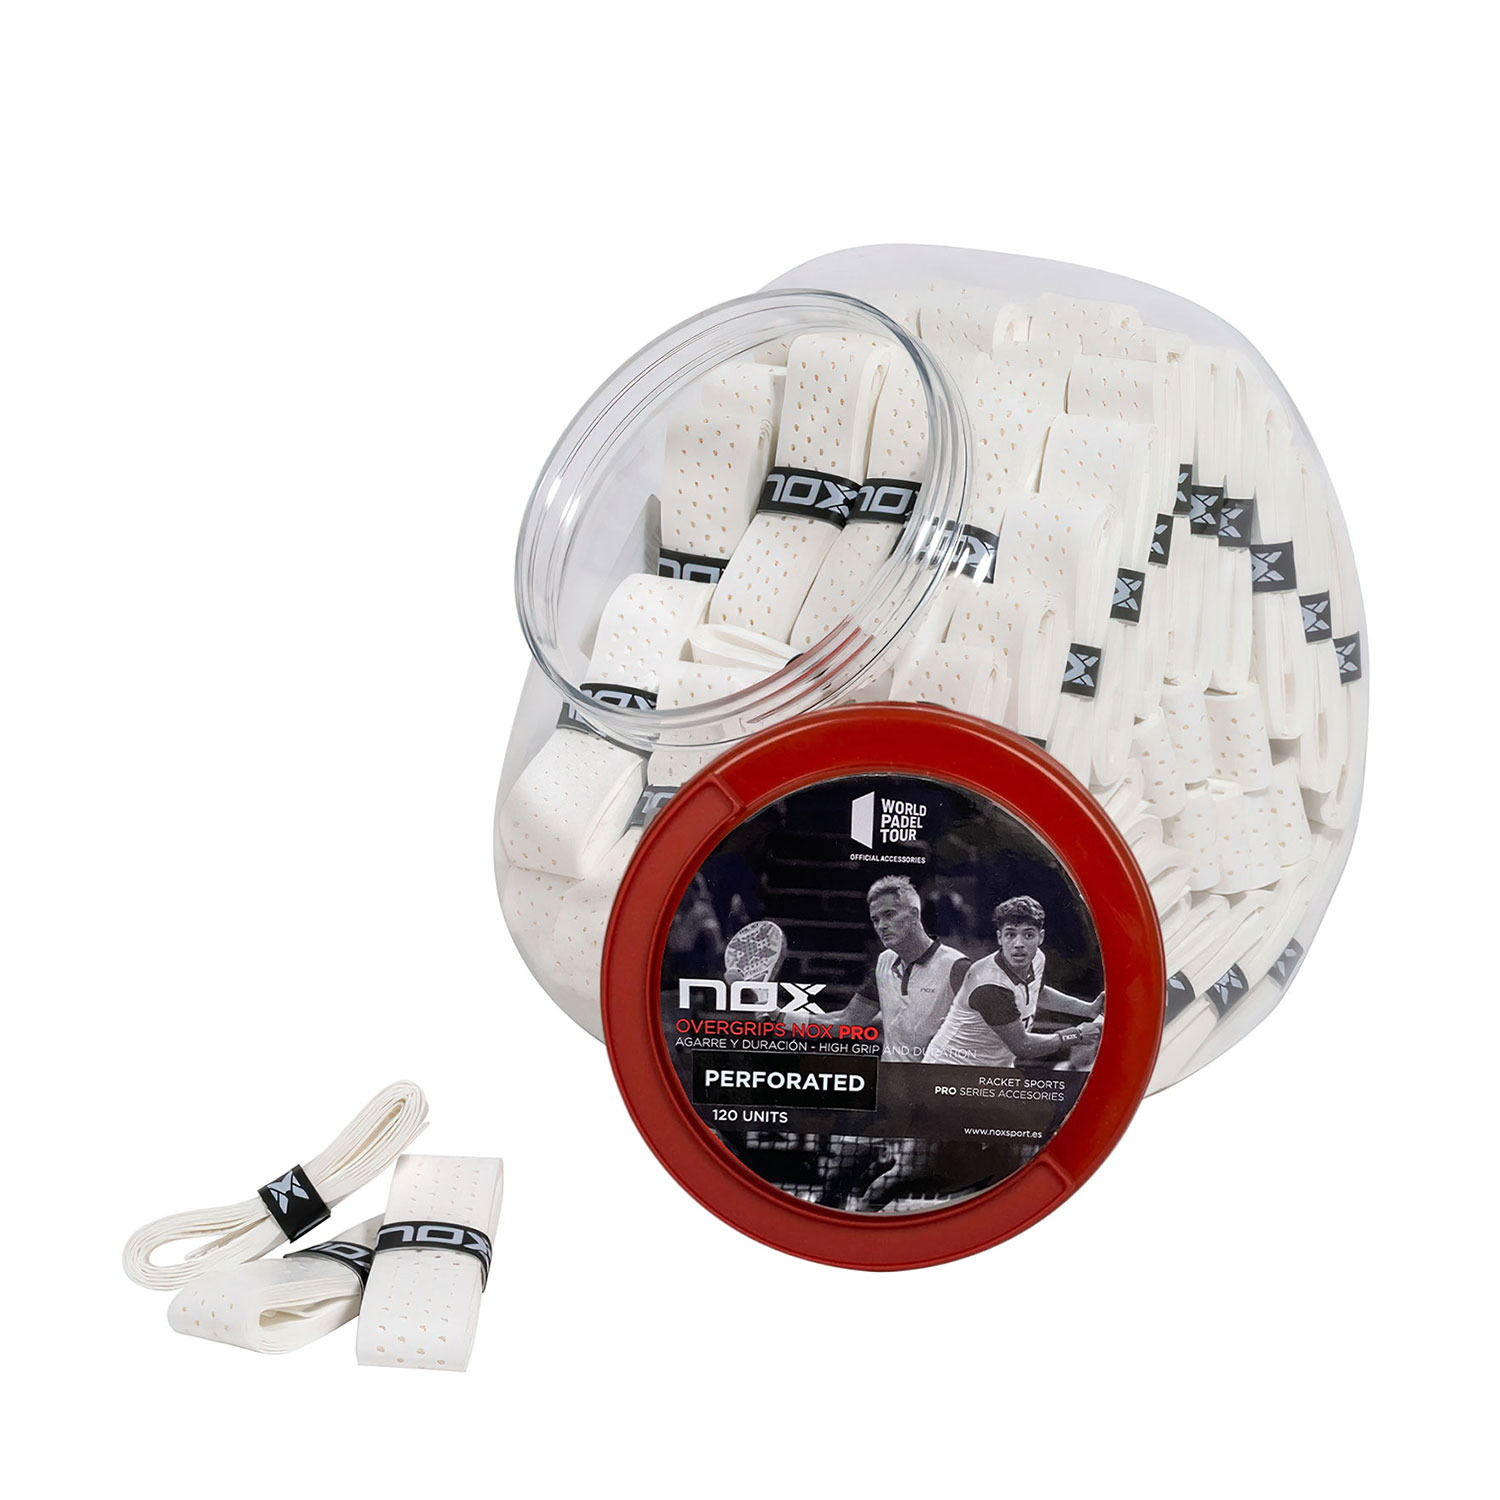 NOX Perforated Pro Sobregrips x 120 - White